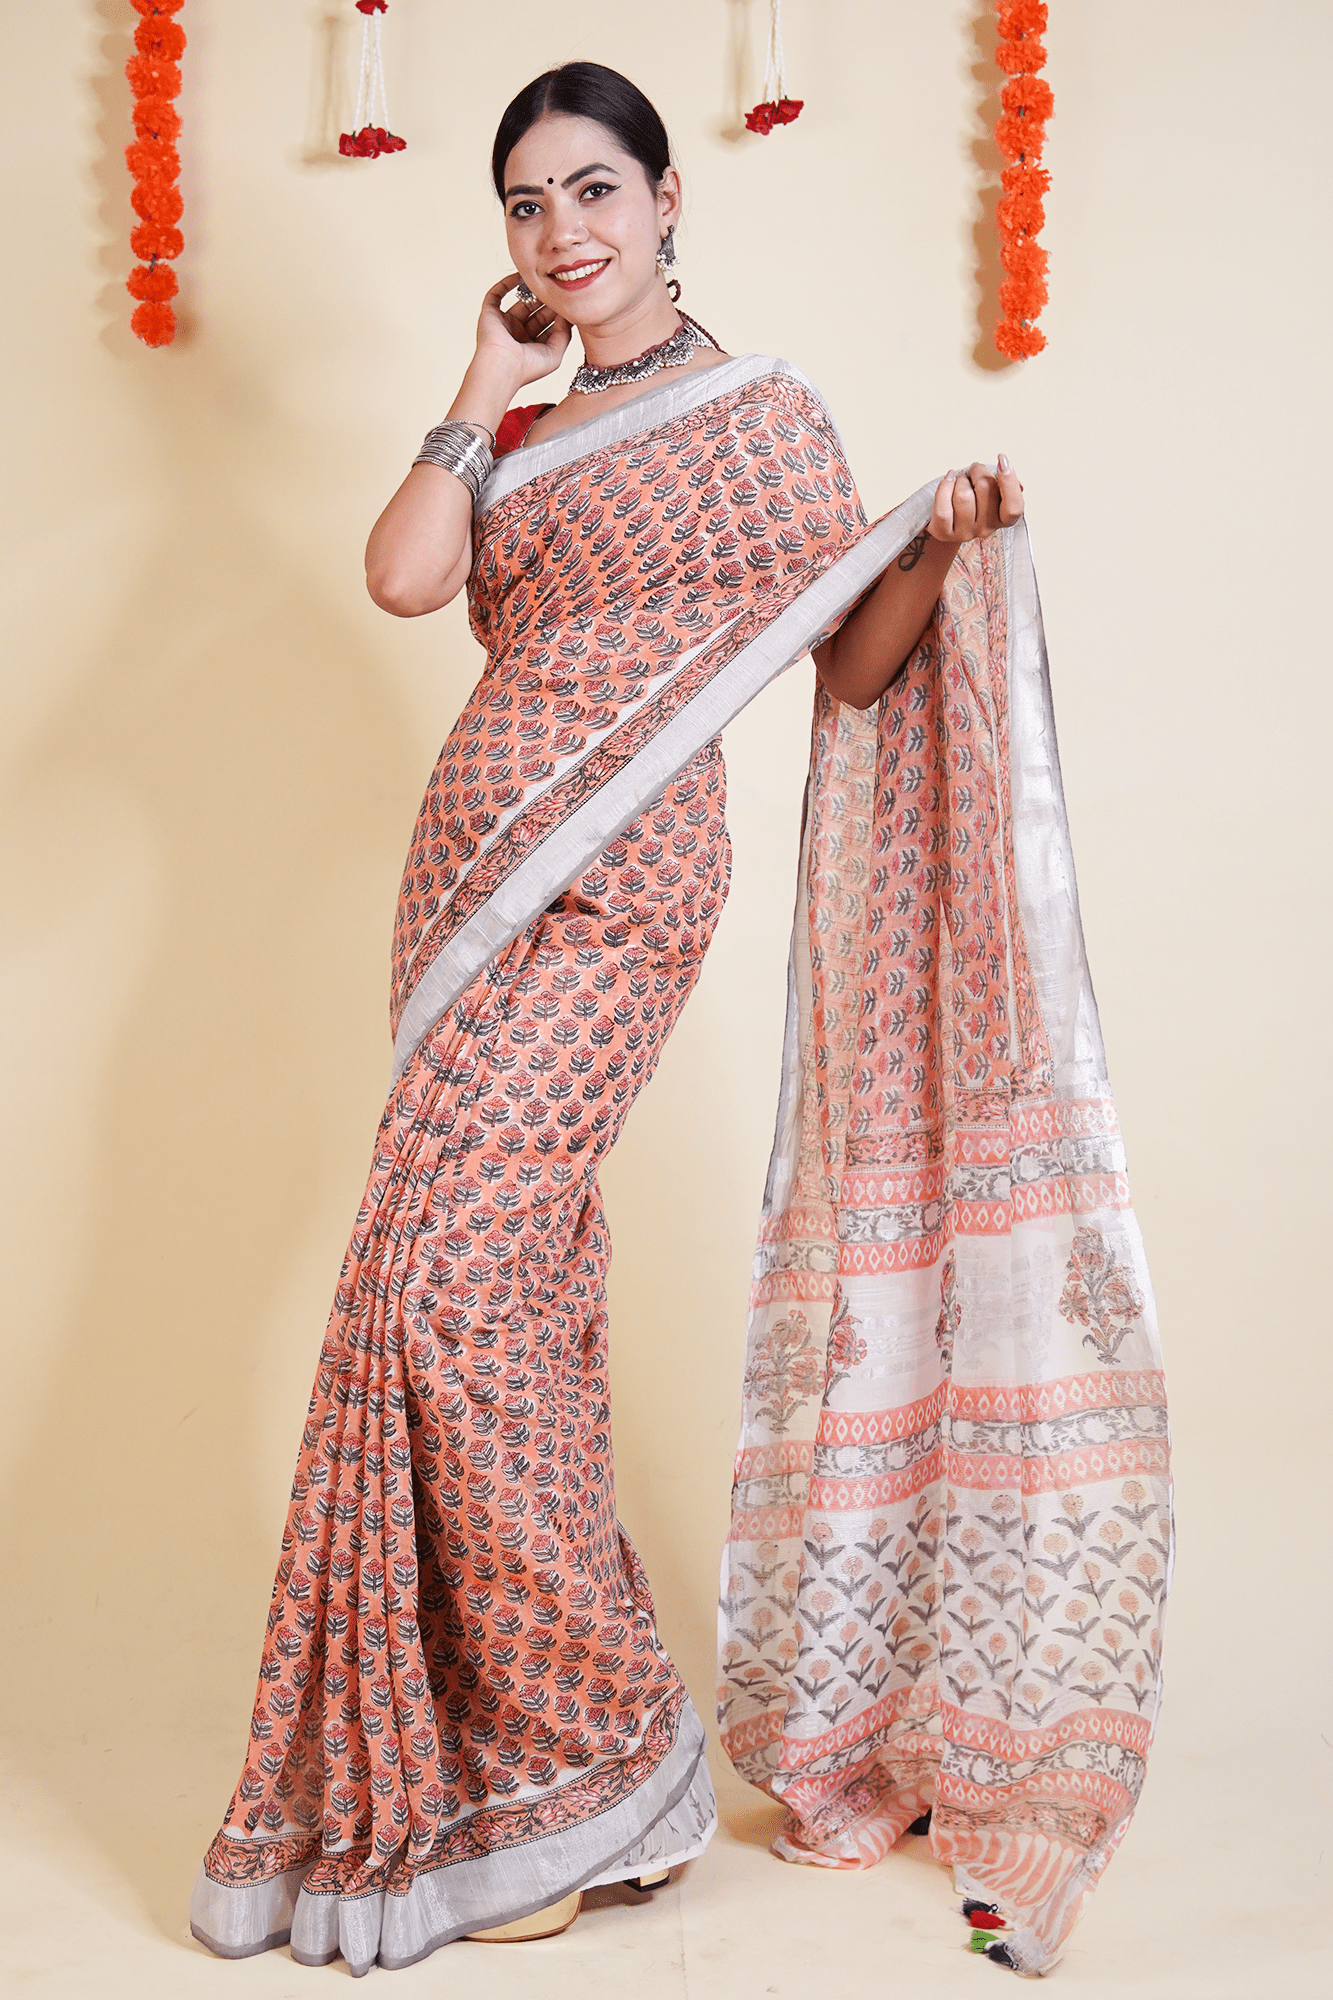 PEACH , ORANGE AND WHITE SOFT LINEN HANDBLOCK PRINTED WRAP IN 1 MINUTE SAREE - Isadora Life Online Shopping Store